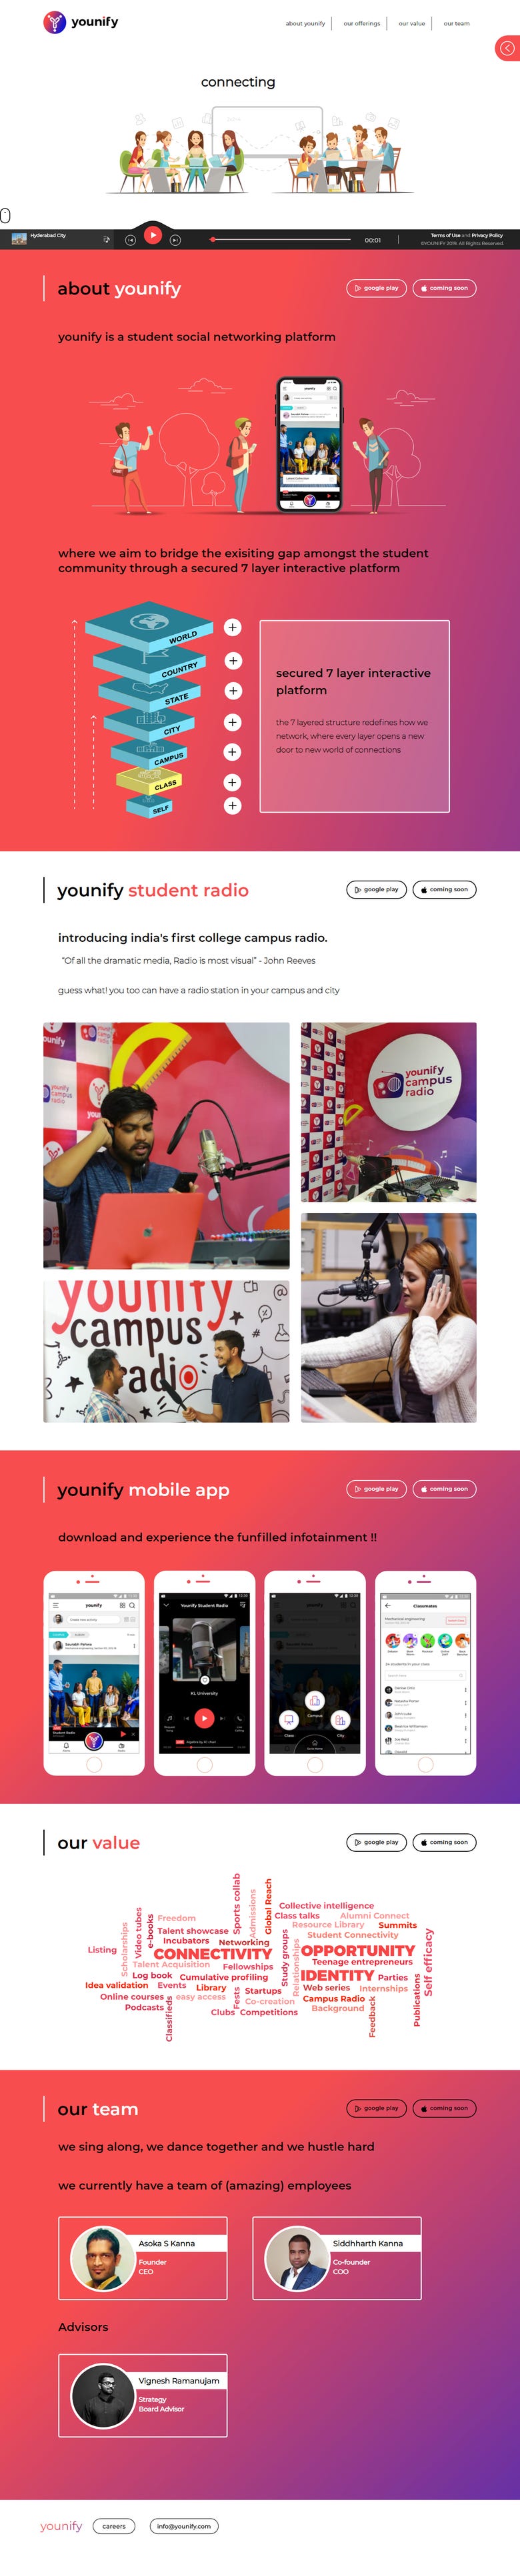 https://www.younify.com